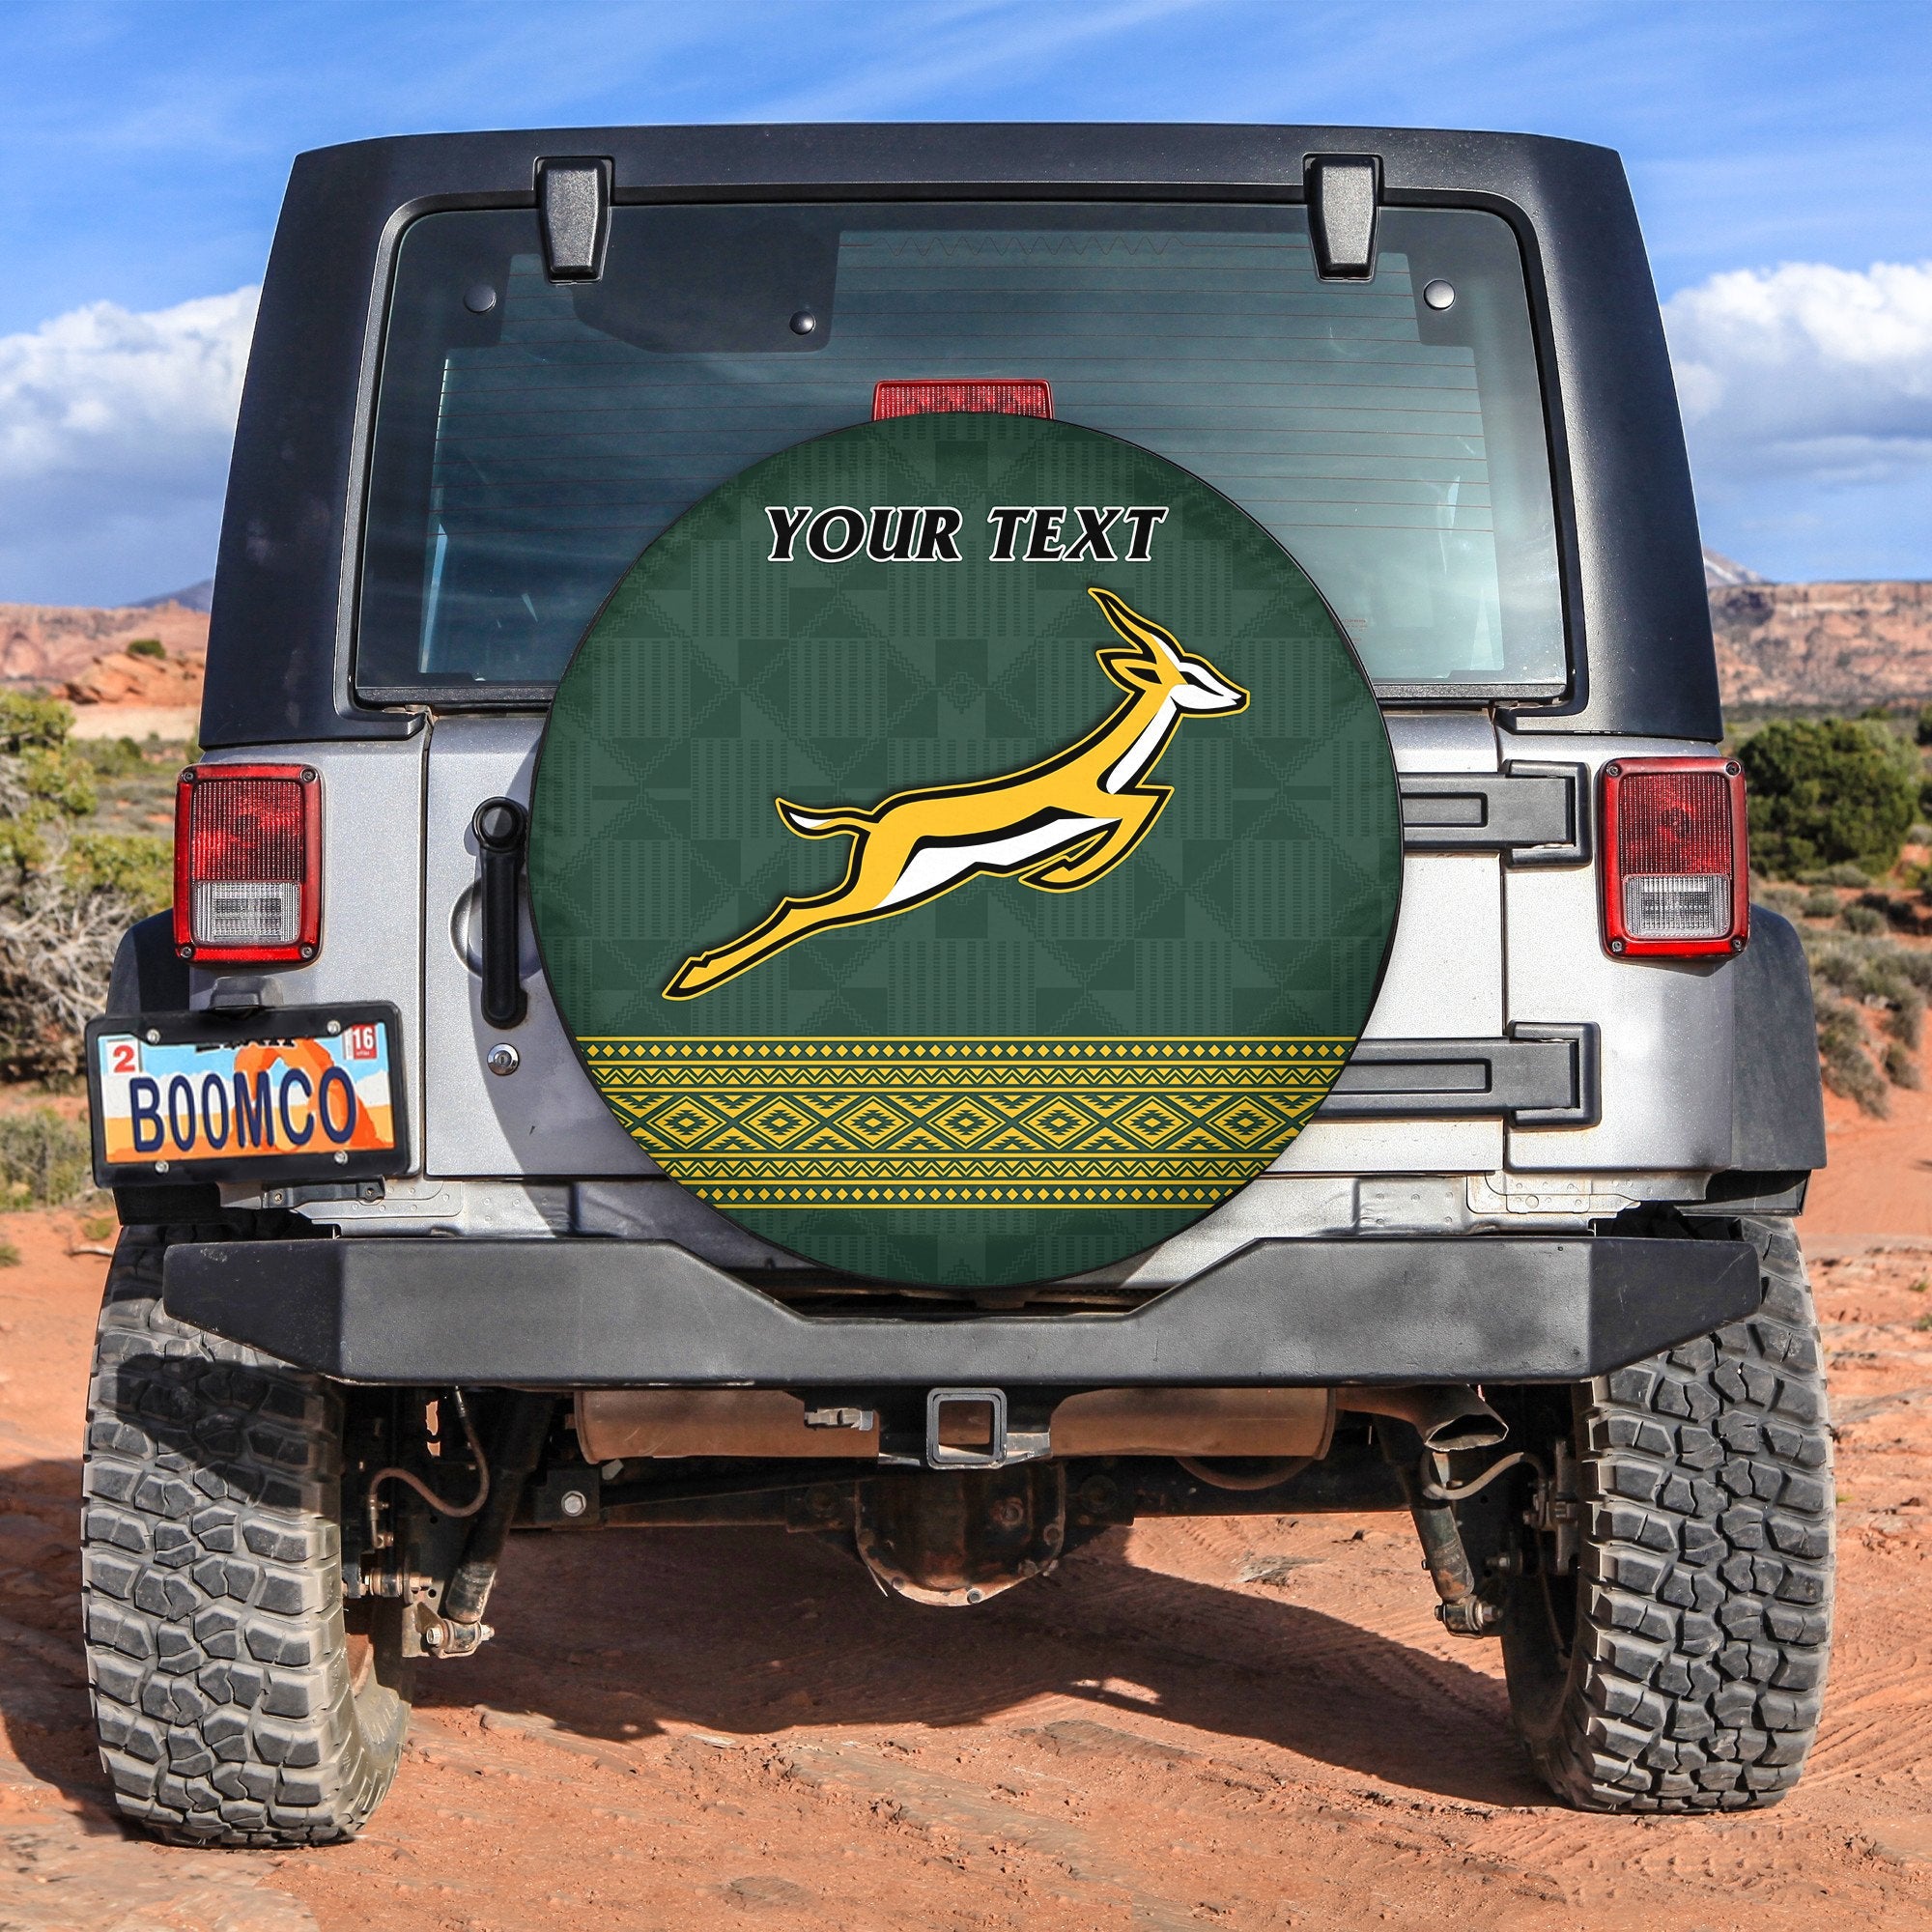 (Custom Personalised) South Africa Protea Spare Tire Cover Rugby Go Springboks Ver.01 LT13 Green - Polynesian Pride